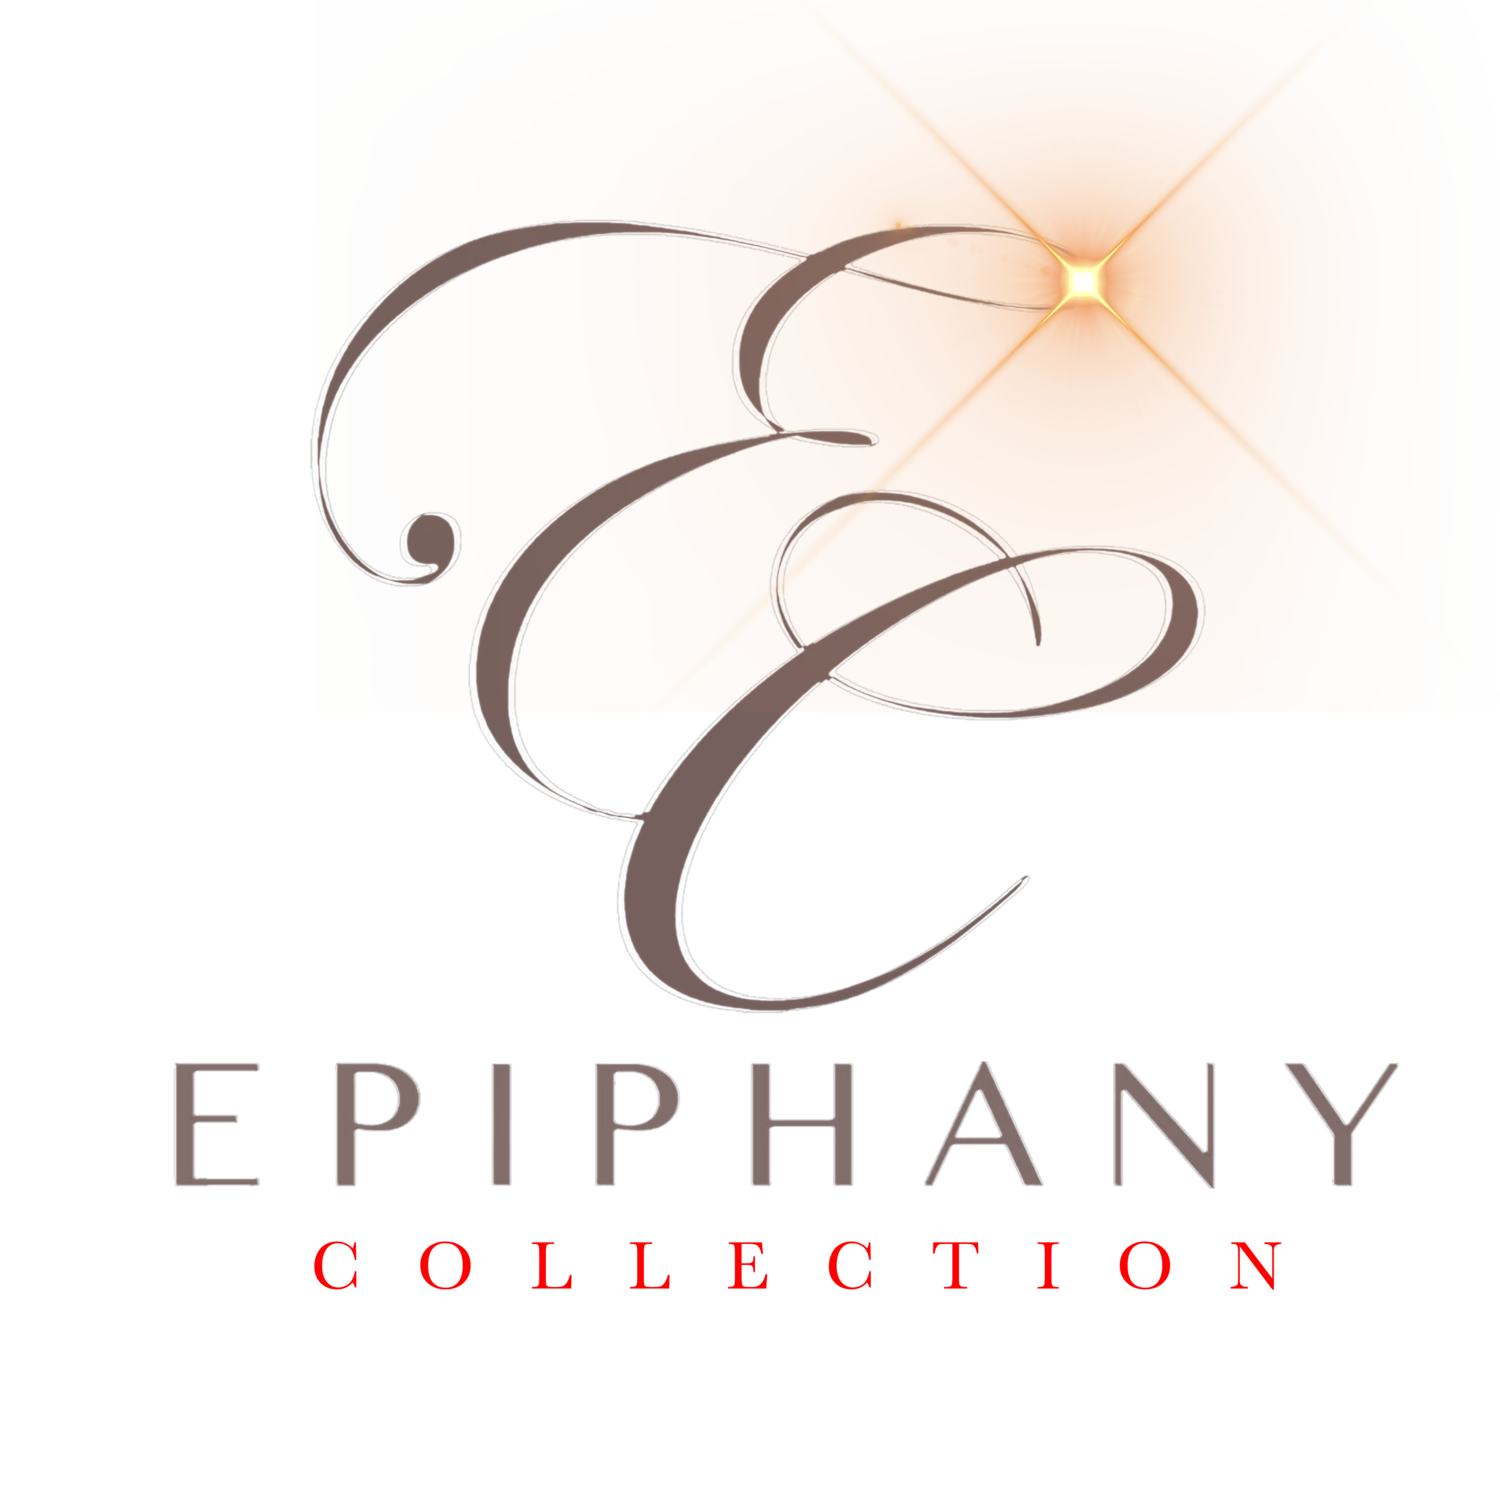 THE EPIPHANY COLLECTION